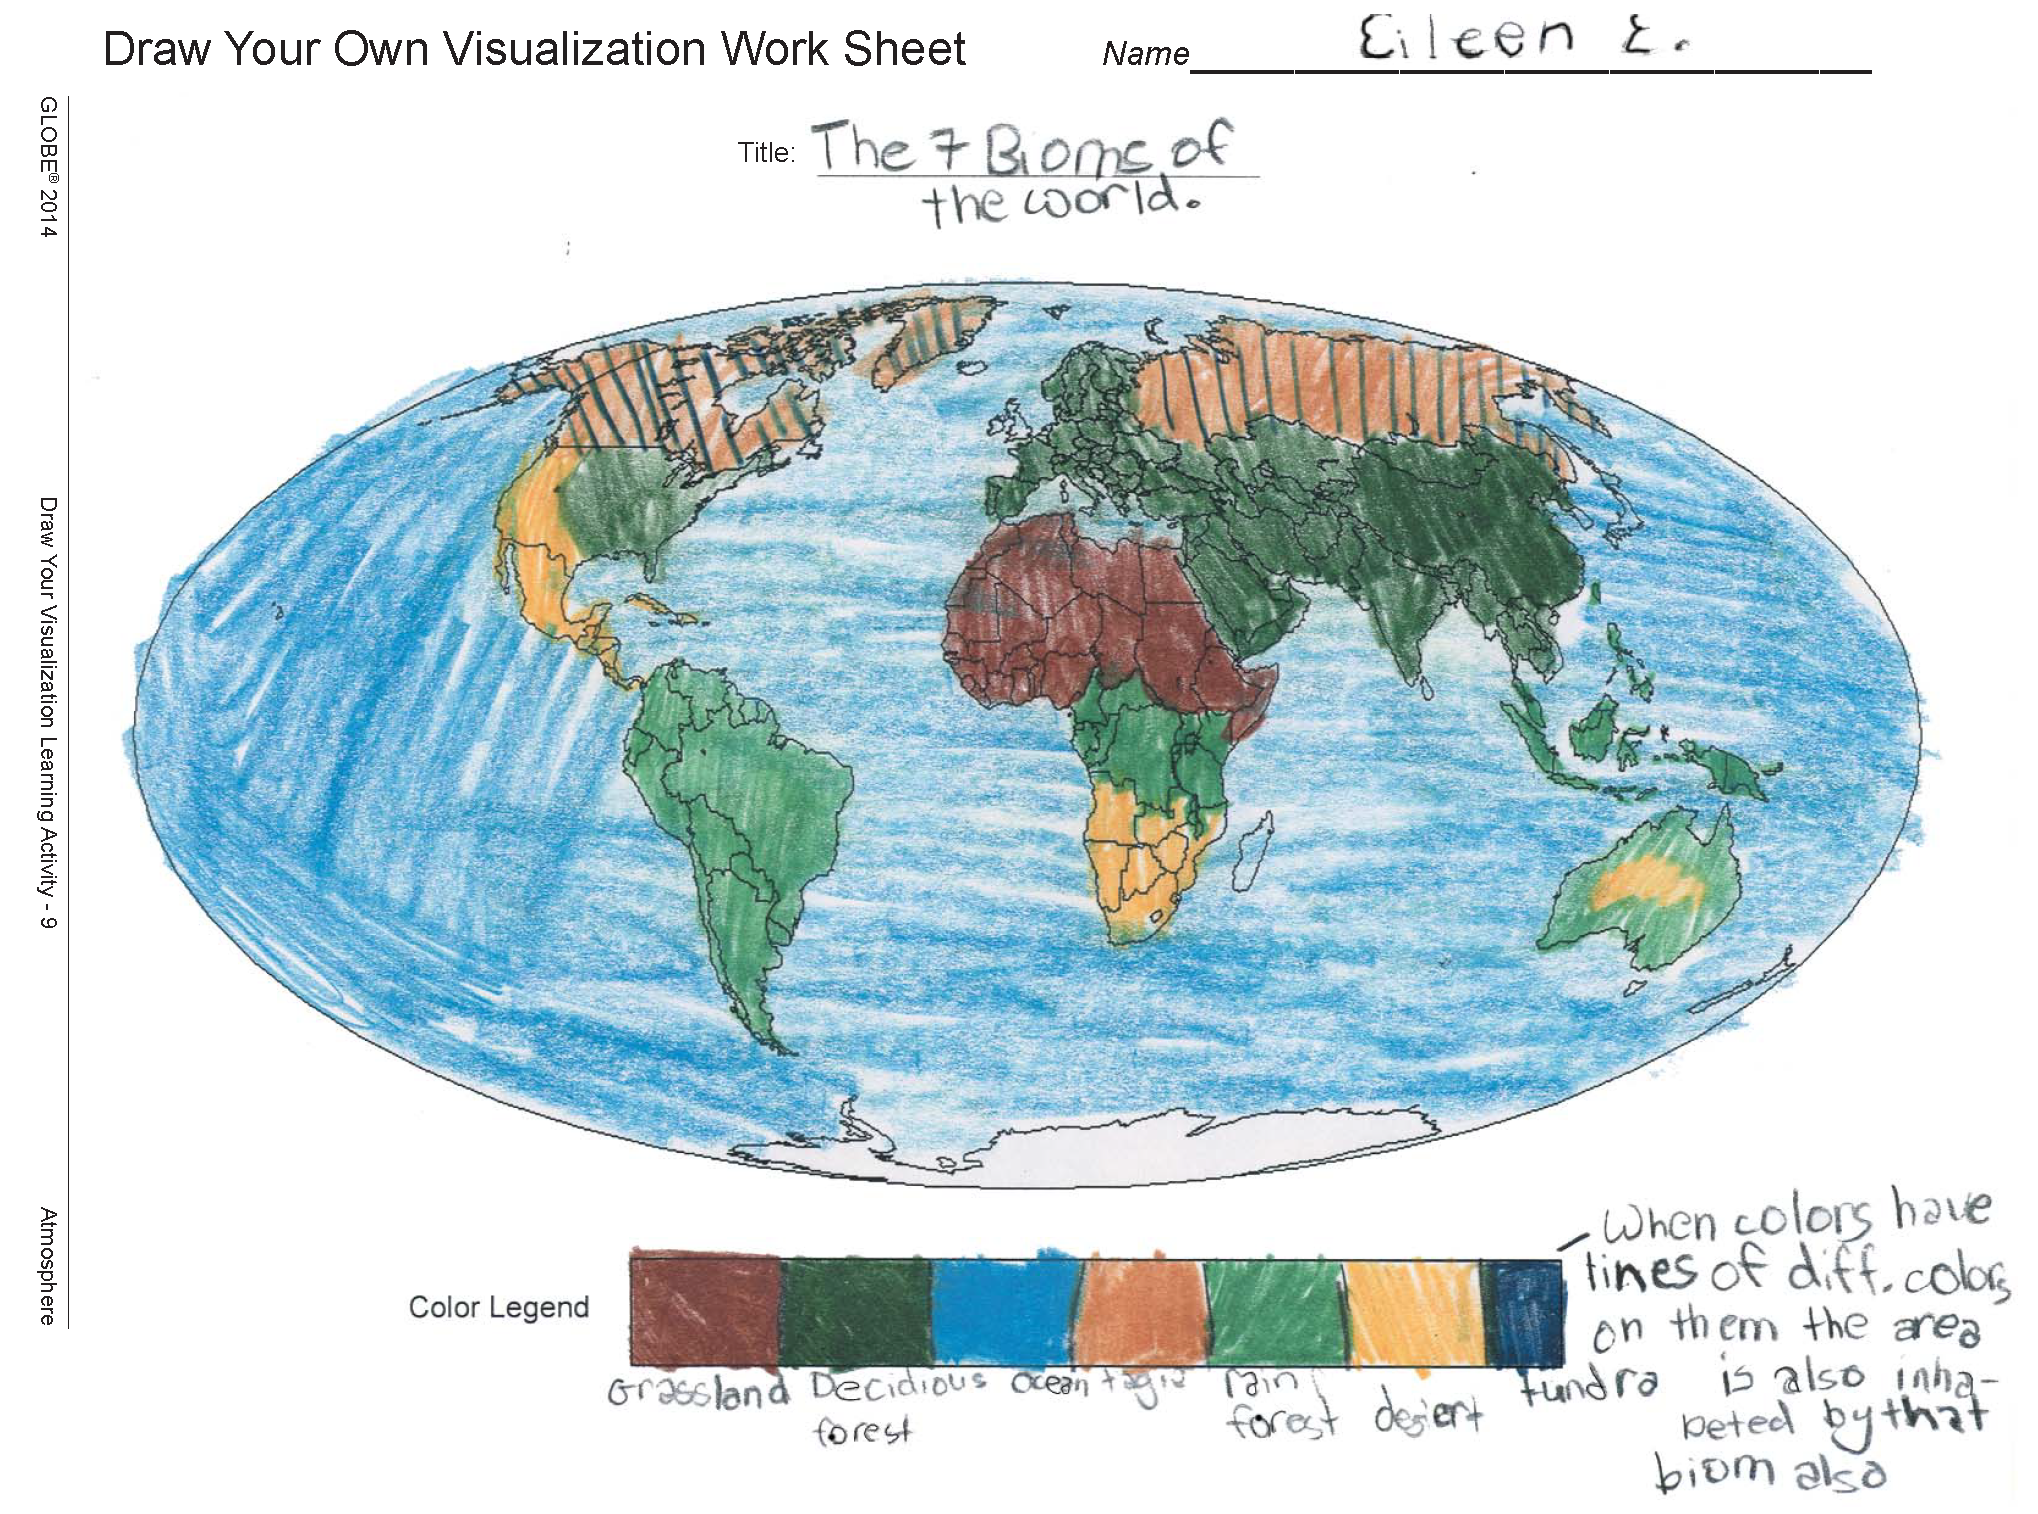 Draw your own visualization example